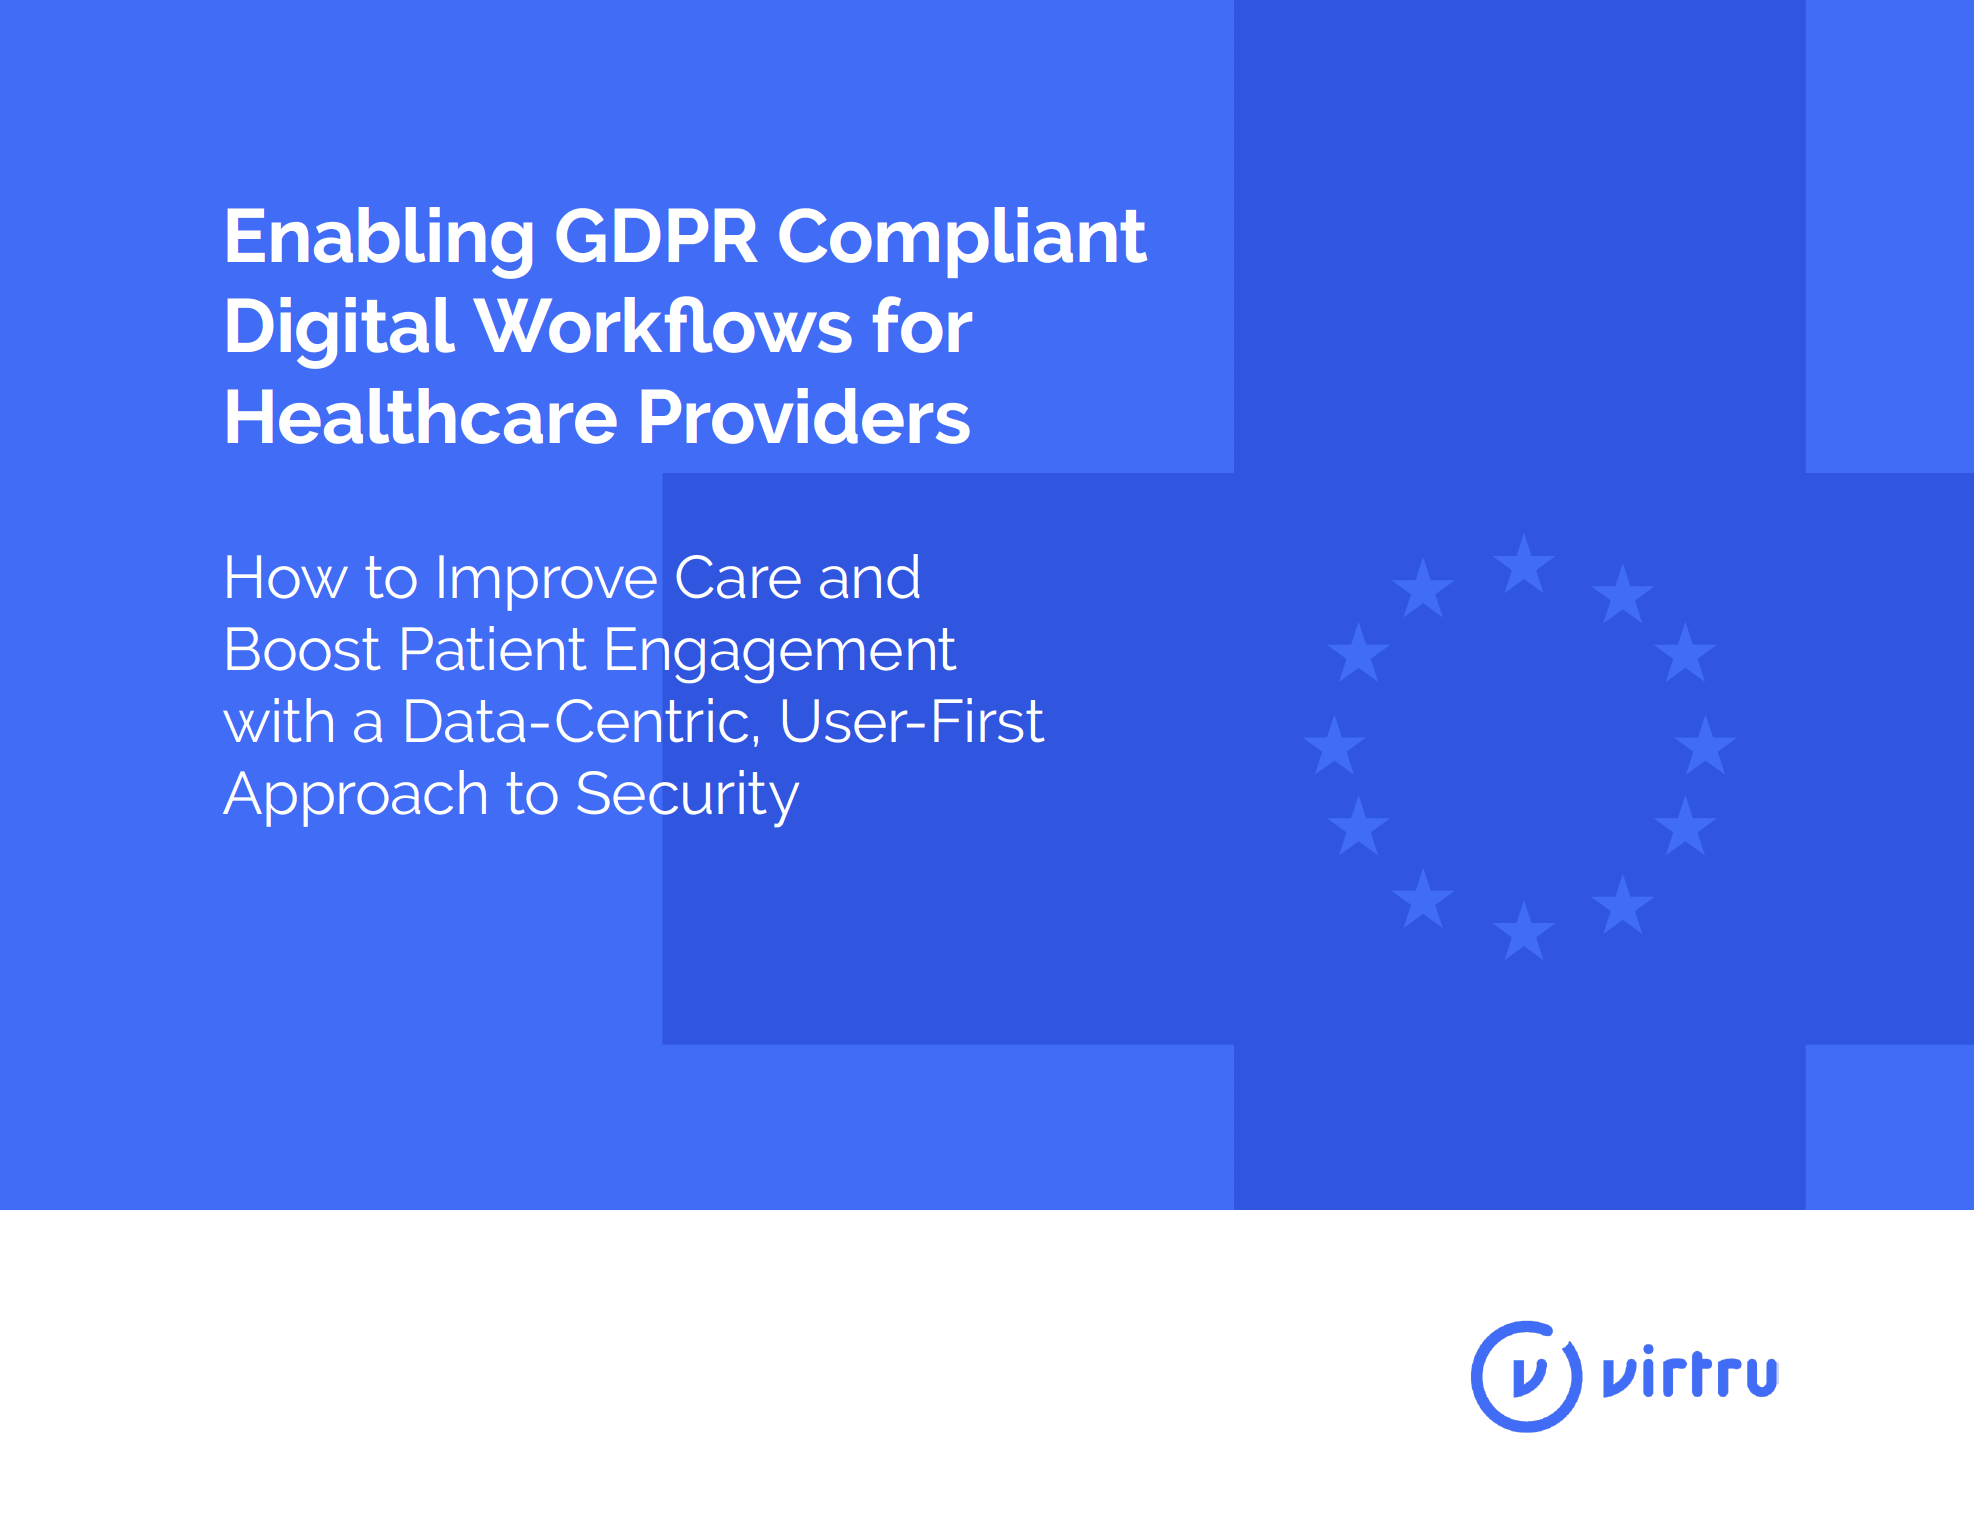 Enabling GDPR Compliant Digital Workflows for Healthcare Providers